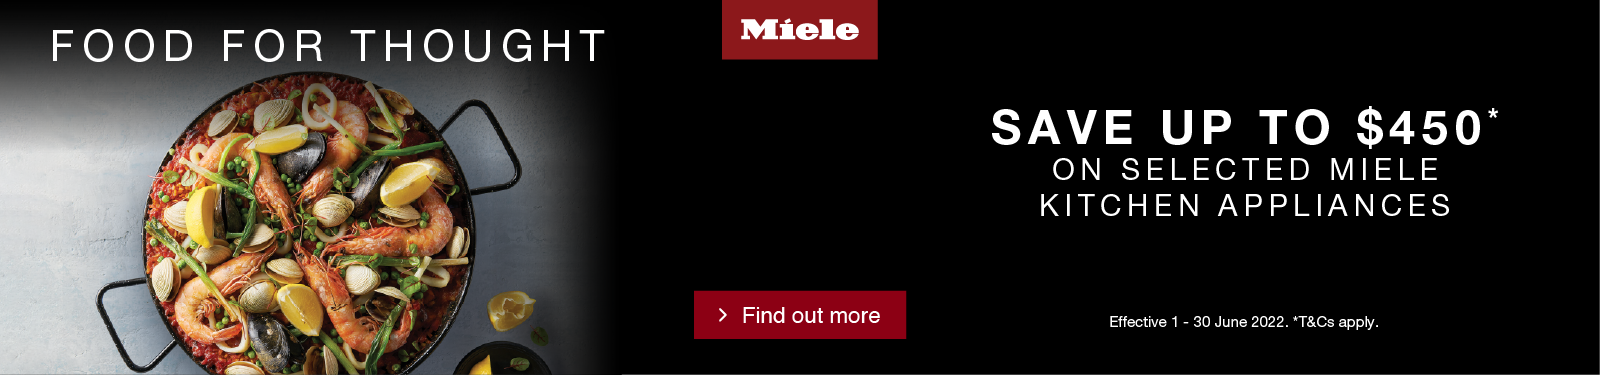 Save up to $450 on selected Miele Kitchen Appliances at Retravision